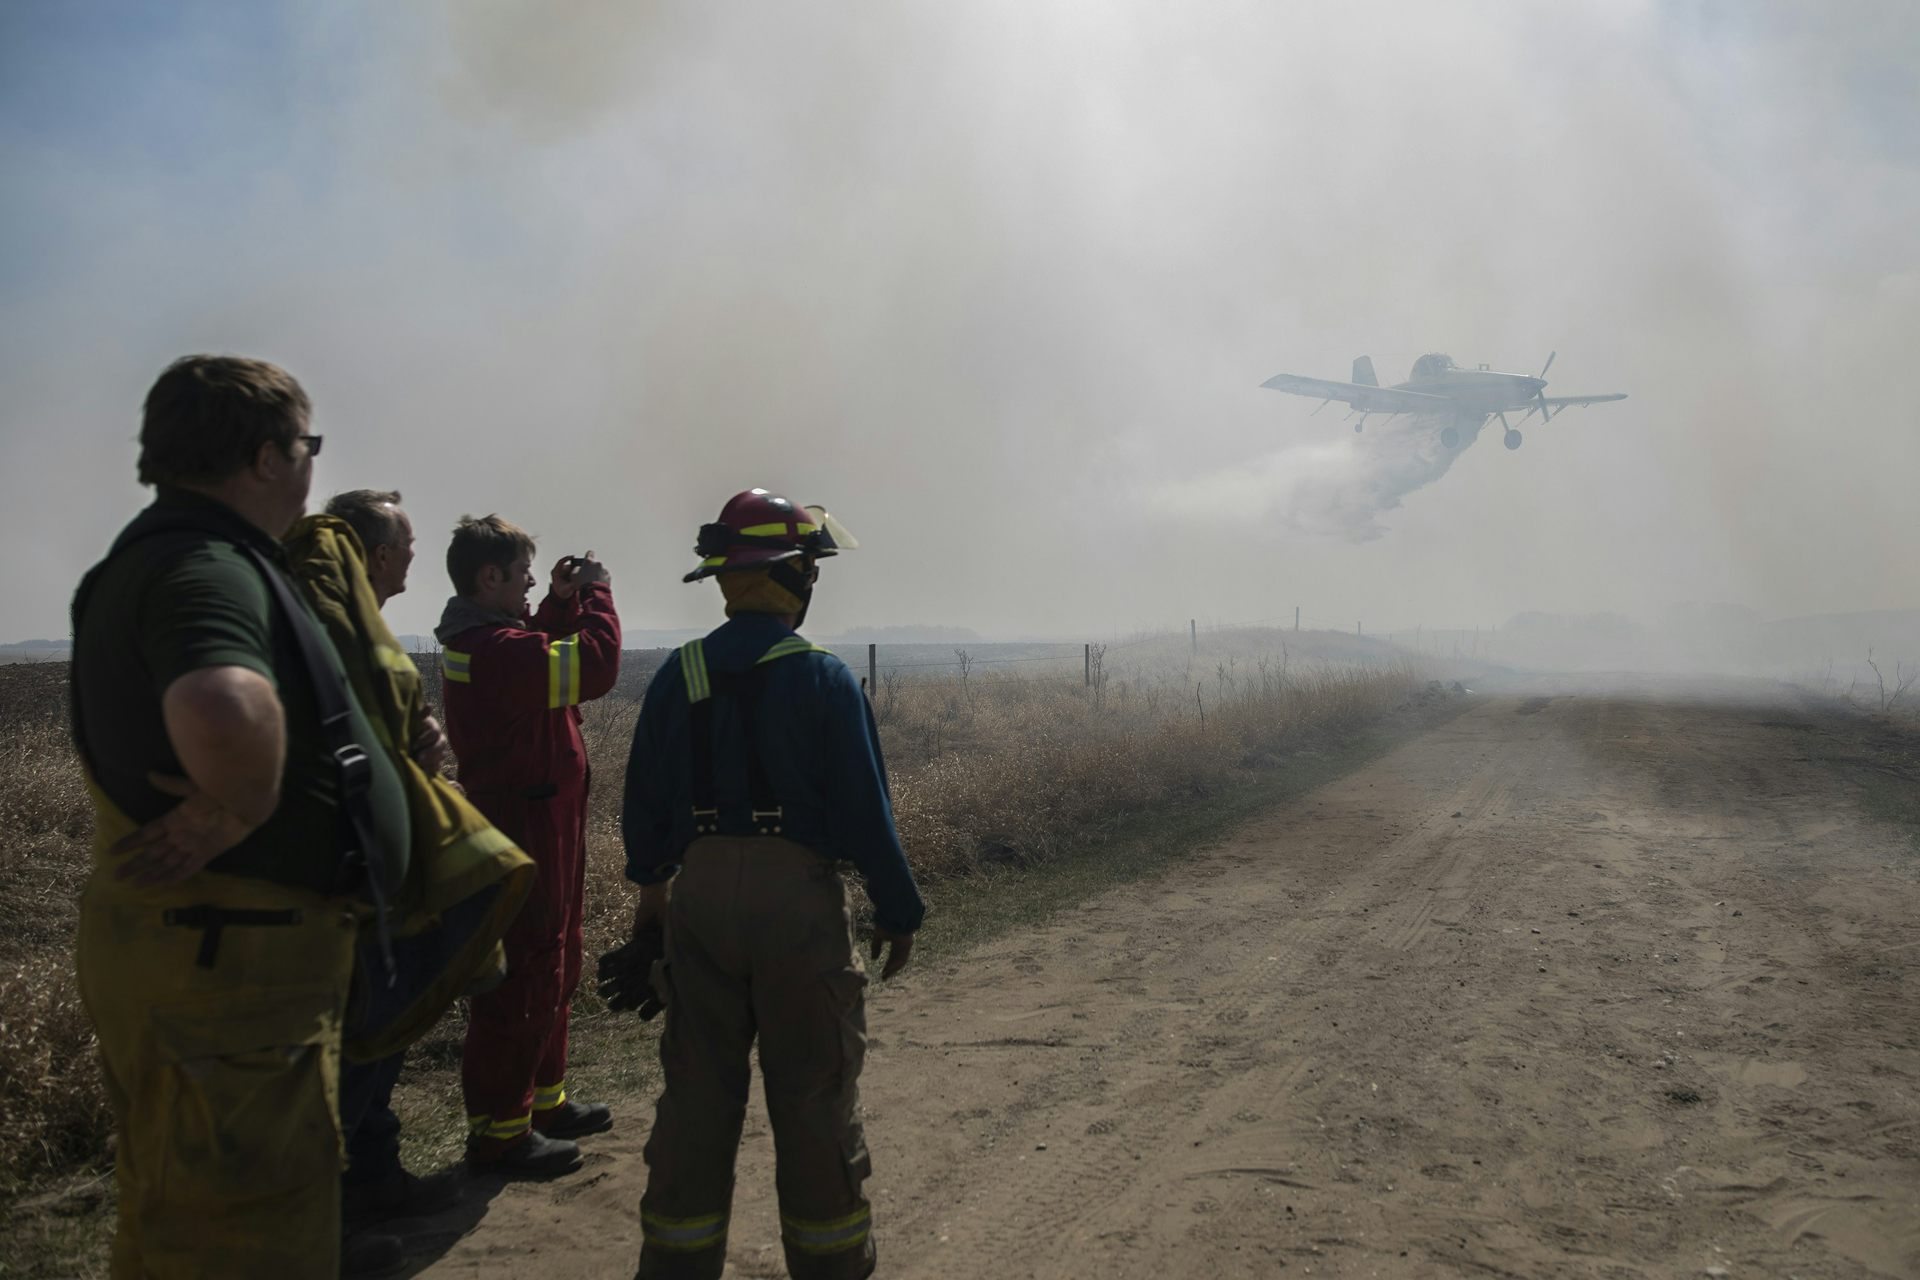 Men in firefighting equipment watch a water plane dumping water on a wildfire on the near horizon.